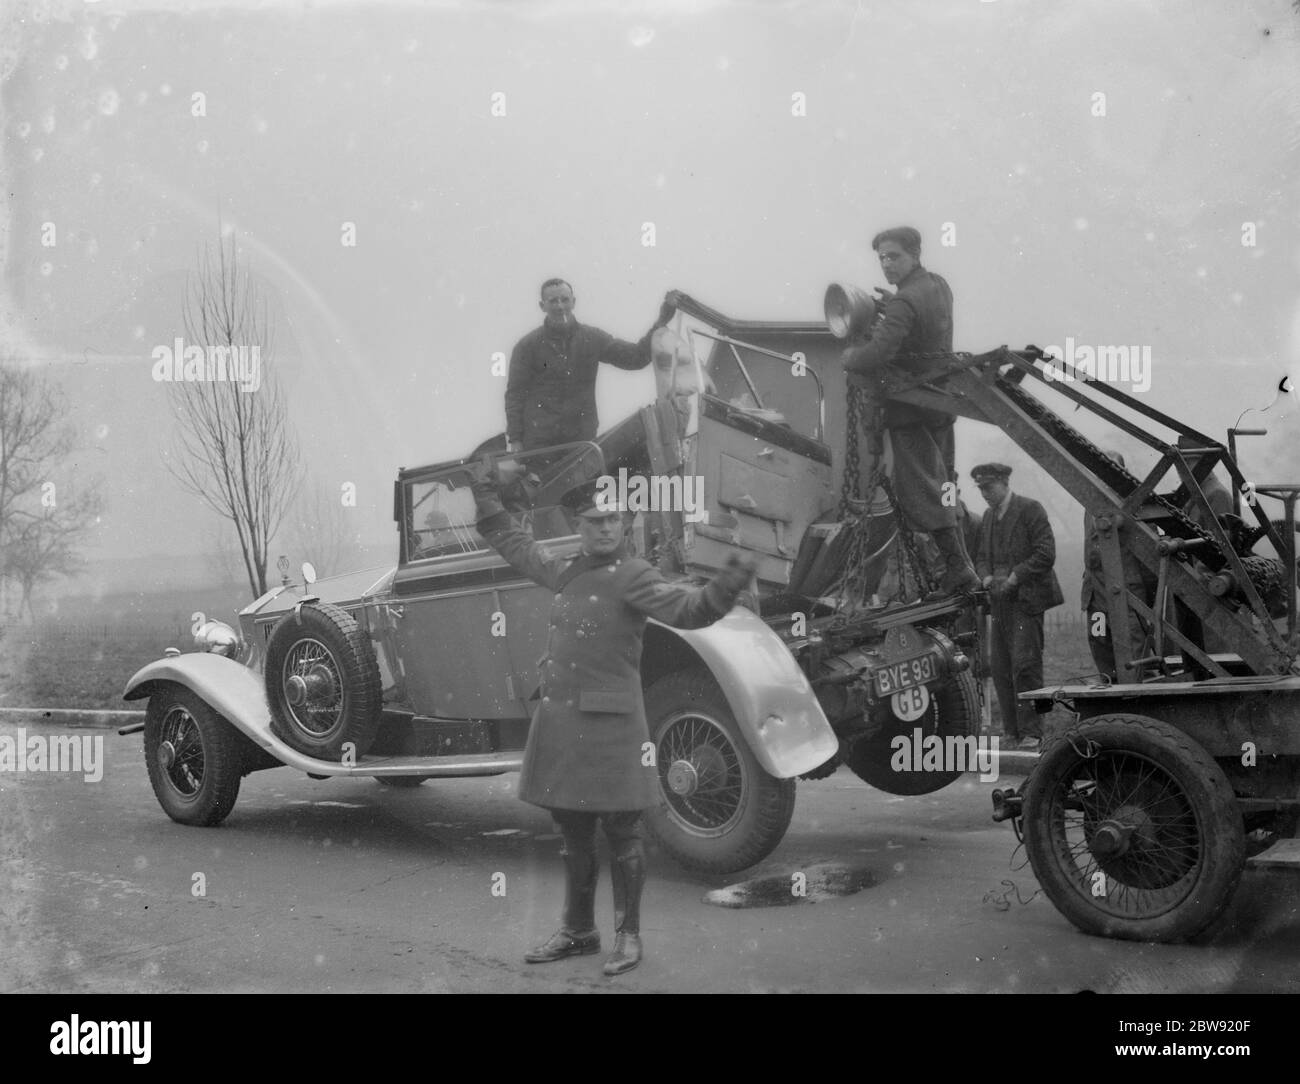 The damaged Rolls Royce being towed away after it had crashed with a lorry in Bexley , Kent . AA patrolman directs the traffic . 28 February 1936 Stock Photo